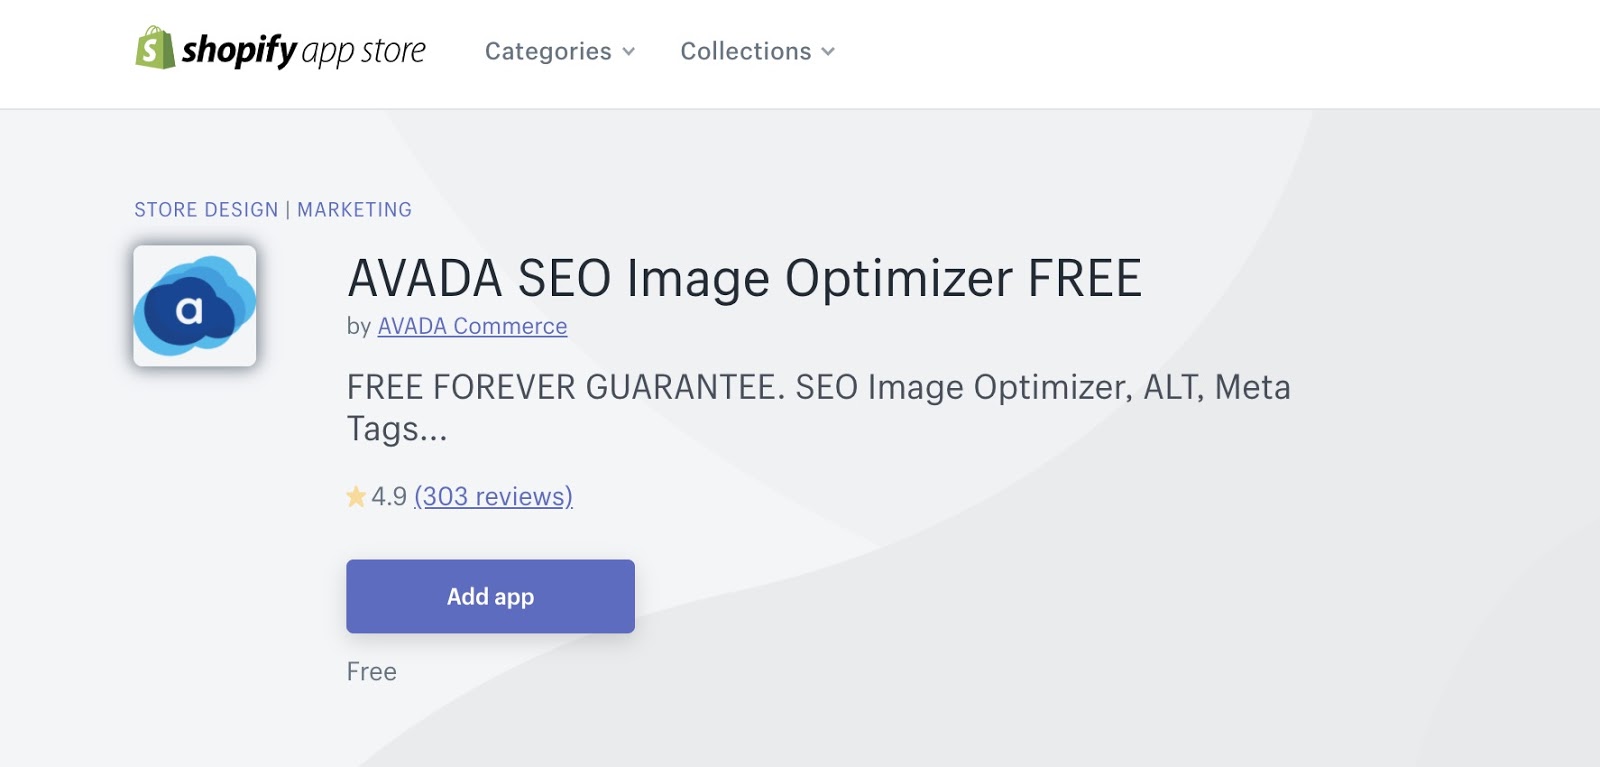 How Much Does It Cost To buy AVADA SEO Suite apps on Shopify